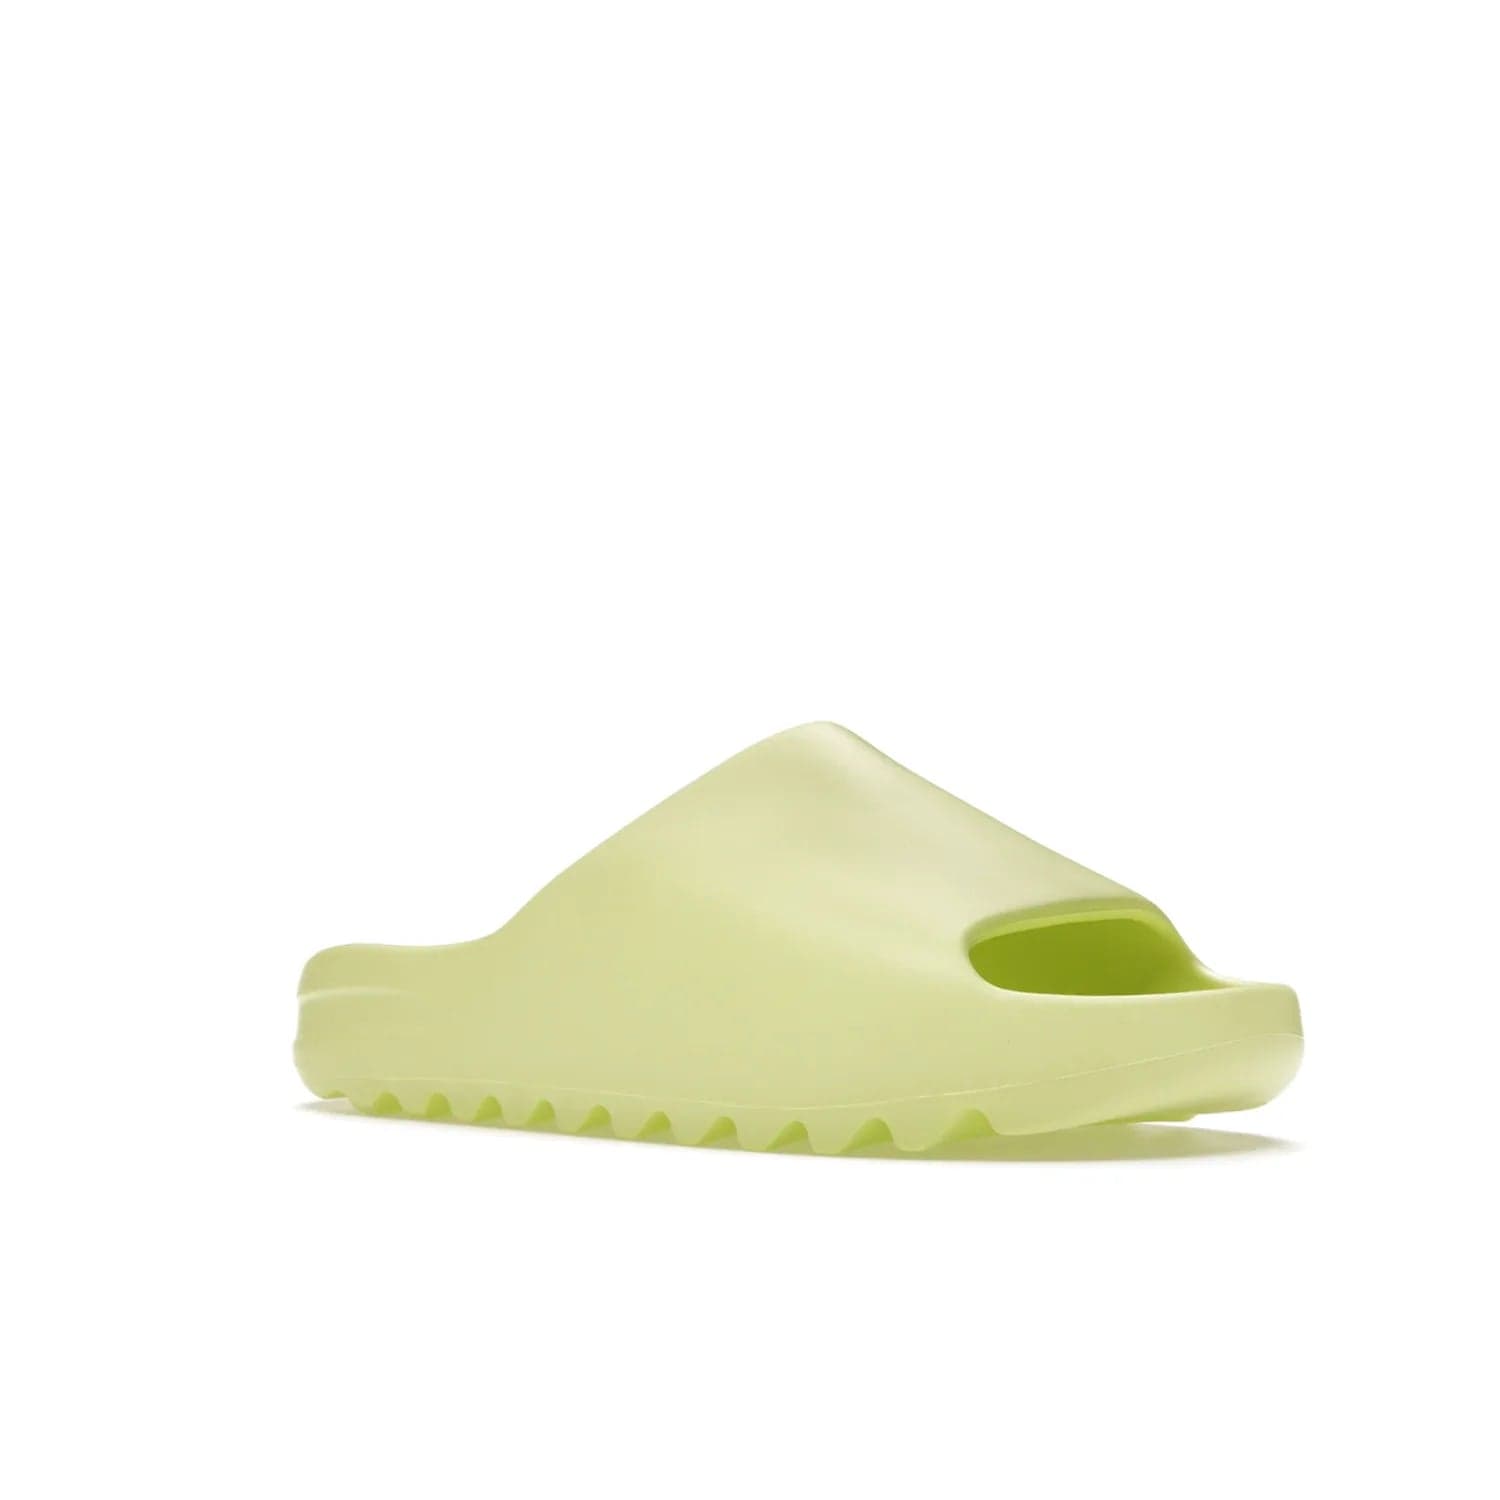 adidas Yeezy Slide Glow Green - Image 5 - Only at www.BallersClubKickz.com - Experience an unexpected summer style with the adidas Yeezy Slide Glow Green. This limited edition slide sandal provides a lightweight and durable construction and a bold Glow Green hue. Strategic grooves enhance traction and provide all-day comfort. Make a statement with the adidas Yeezy Slide Glow Green.